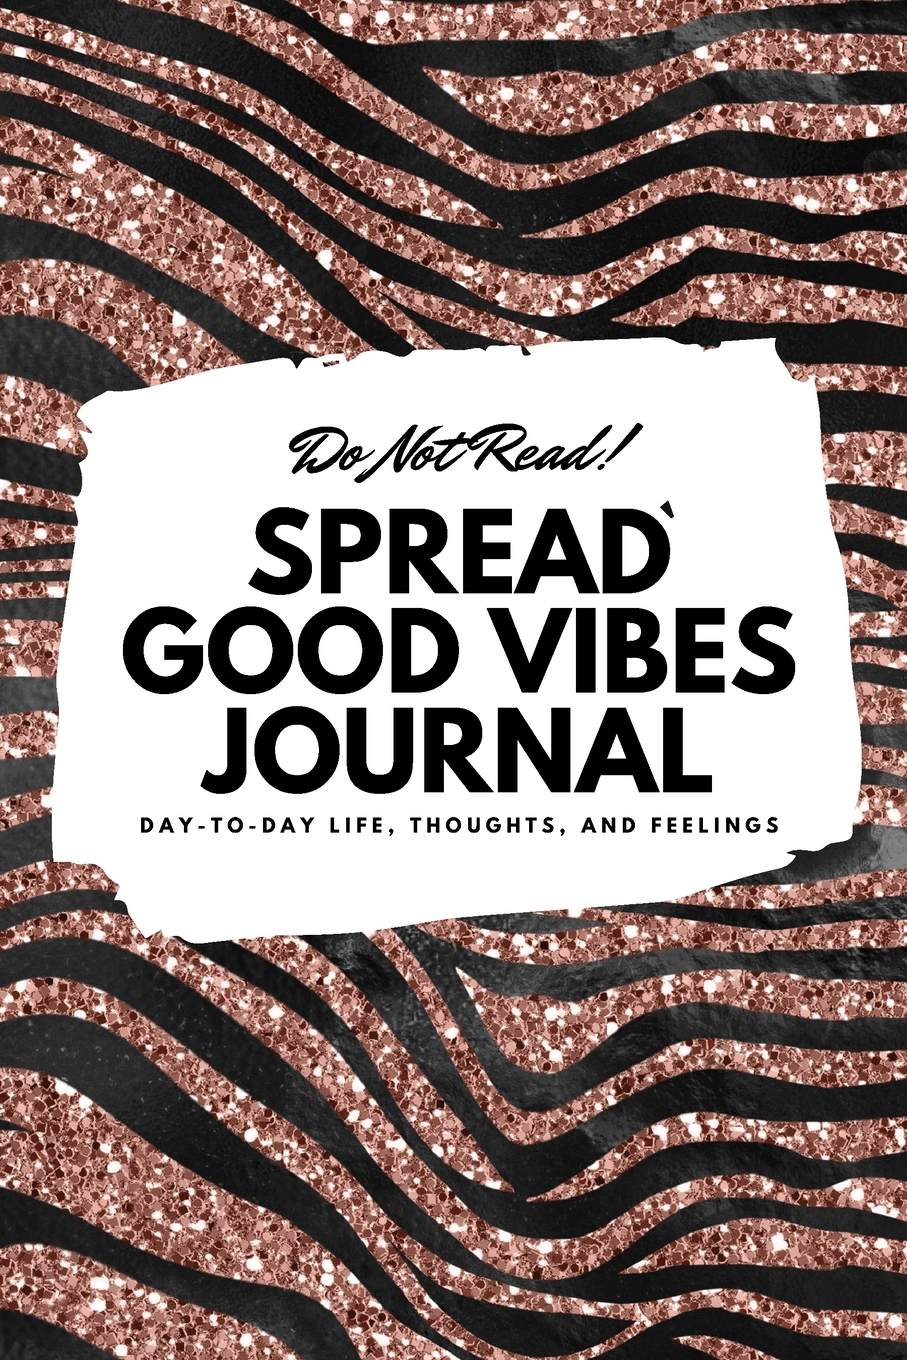 6x9 Blank Journal: Do Not Read! Spread Good Vibes Journal - Small Blank Journal - 6x9 Blank Journal (Softcover Journal / Notebook / Sketchbook / Diary) (Series #45) (Paperback) - image 1 of 1